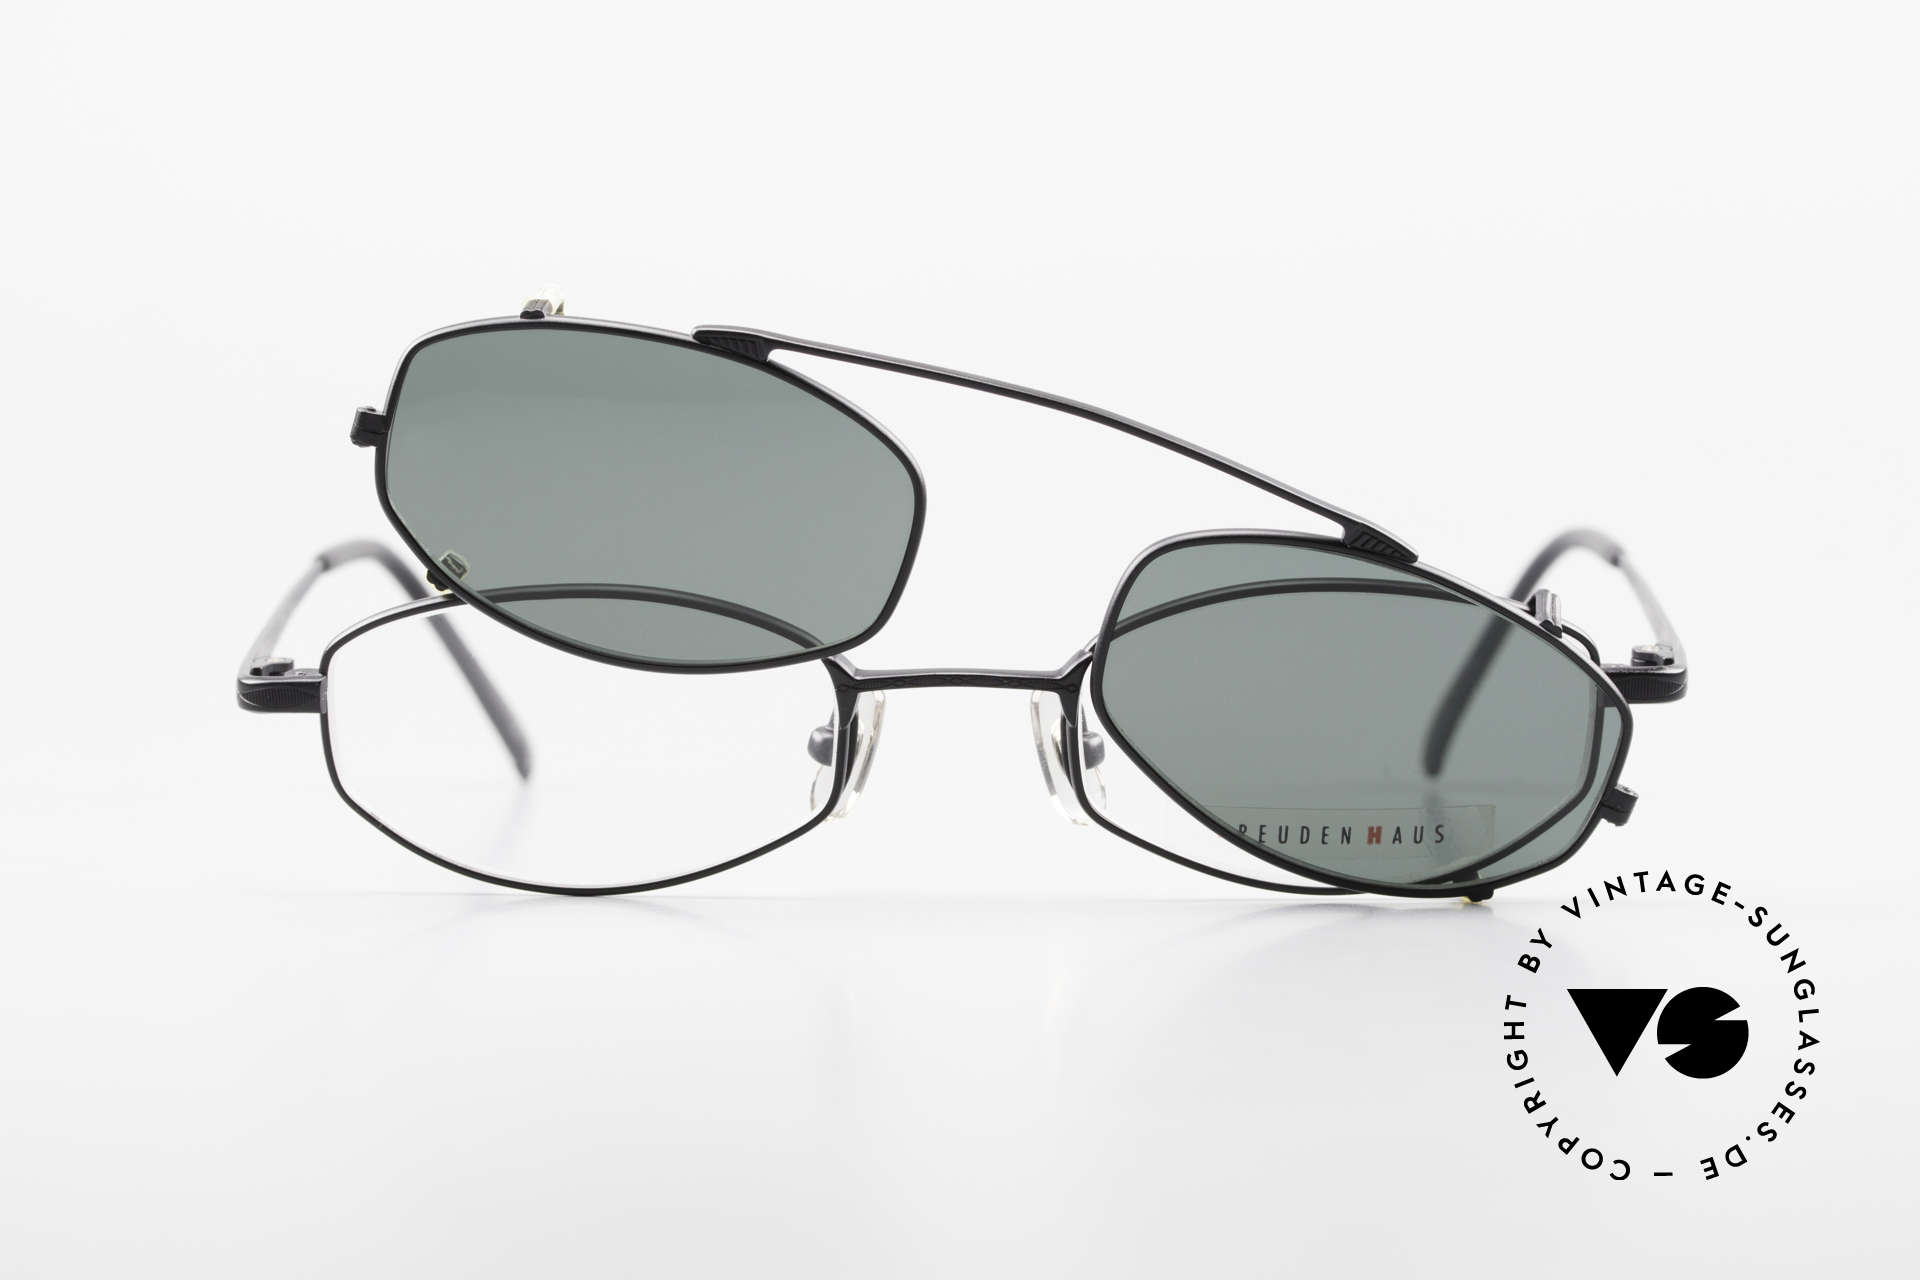 Freudenhaus Ita Titanium Frame With Sun Clip, NO RETRO fashion, but an old Original from the 90's, Made for Men and Women